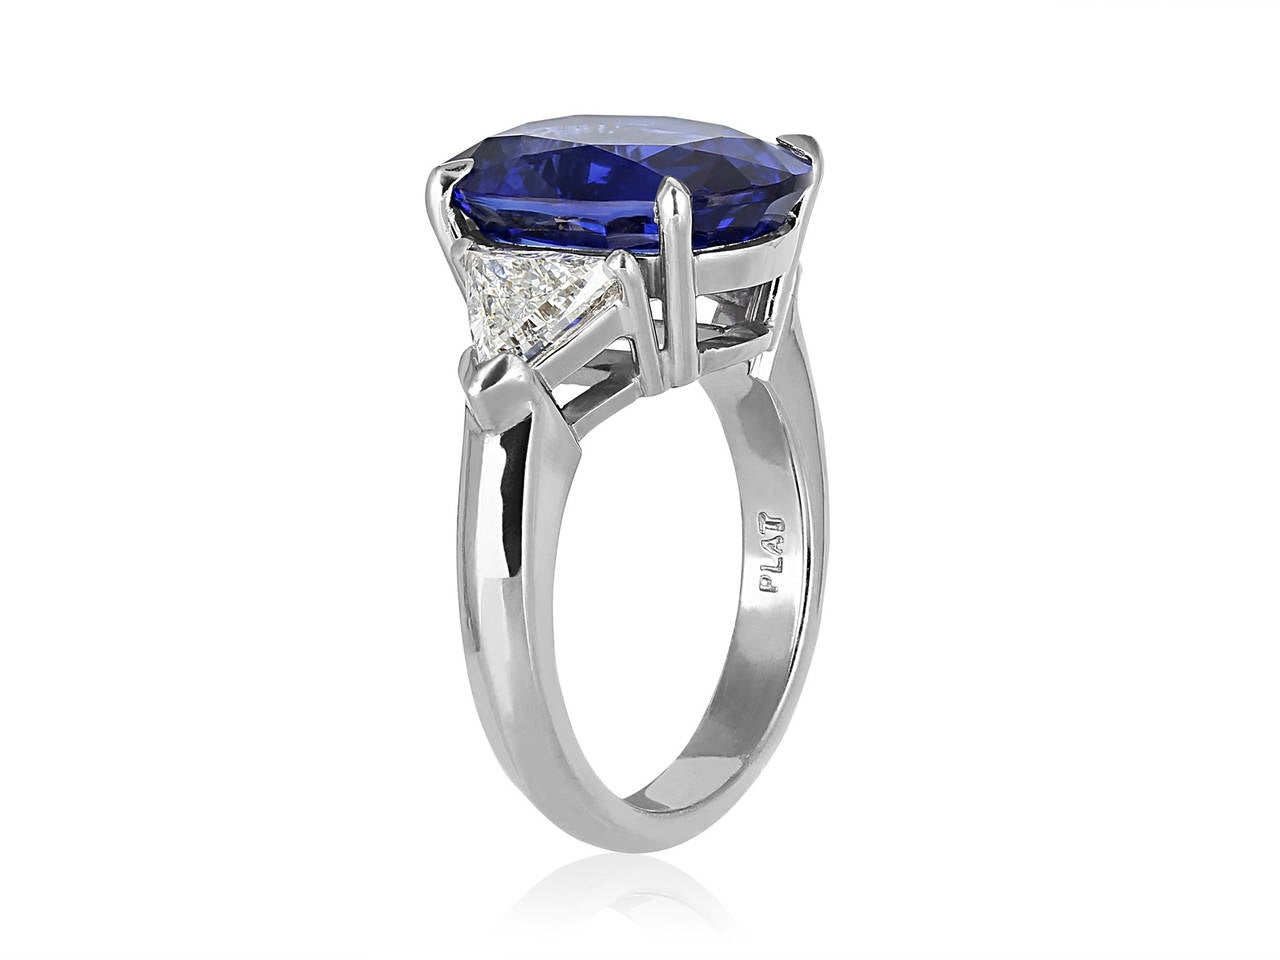 Platinum custom made 3 stone ring consisting of 1 oval shaped sapphire weighing 8.25 carats, measuring 13.85 x 10.34 x 6.33mm with AGL certificate CS 57047 stating origin as Ceylon. The center stone is flanked by 2 trilliant cut diamonds having a